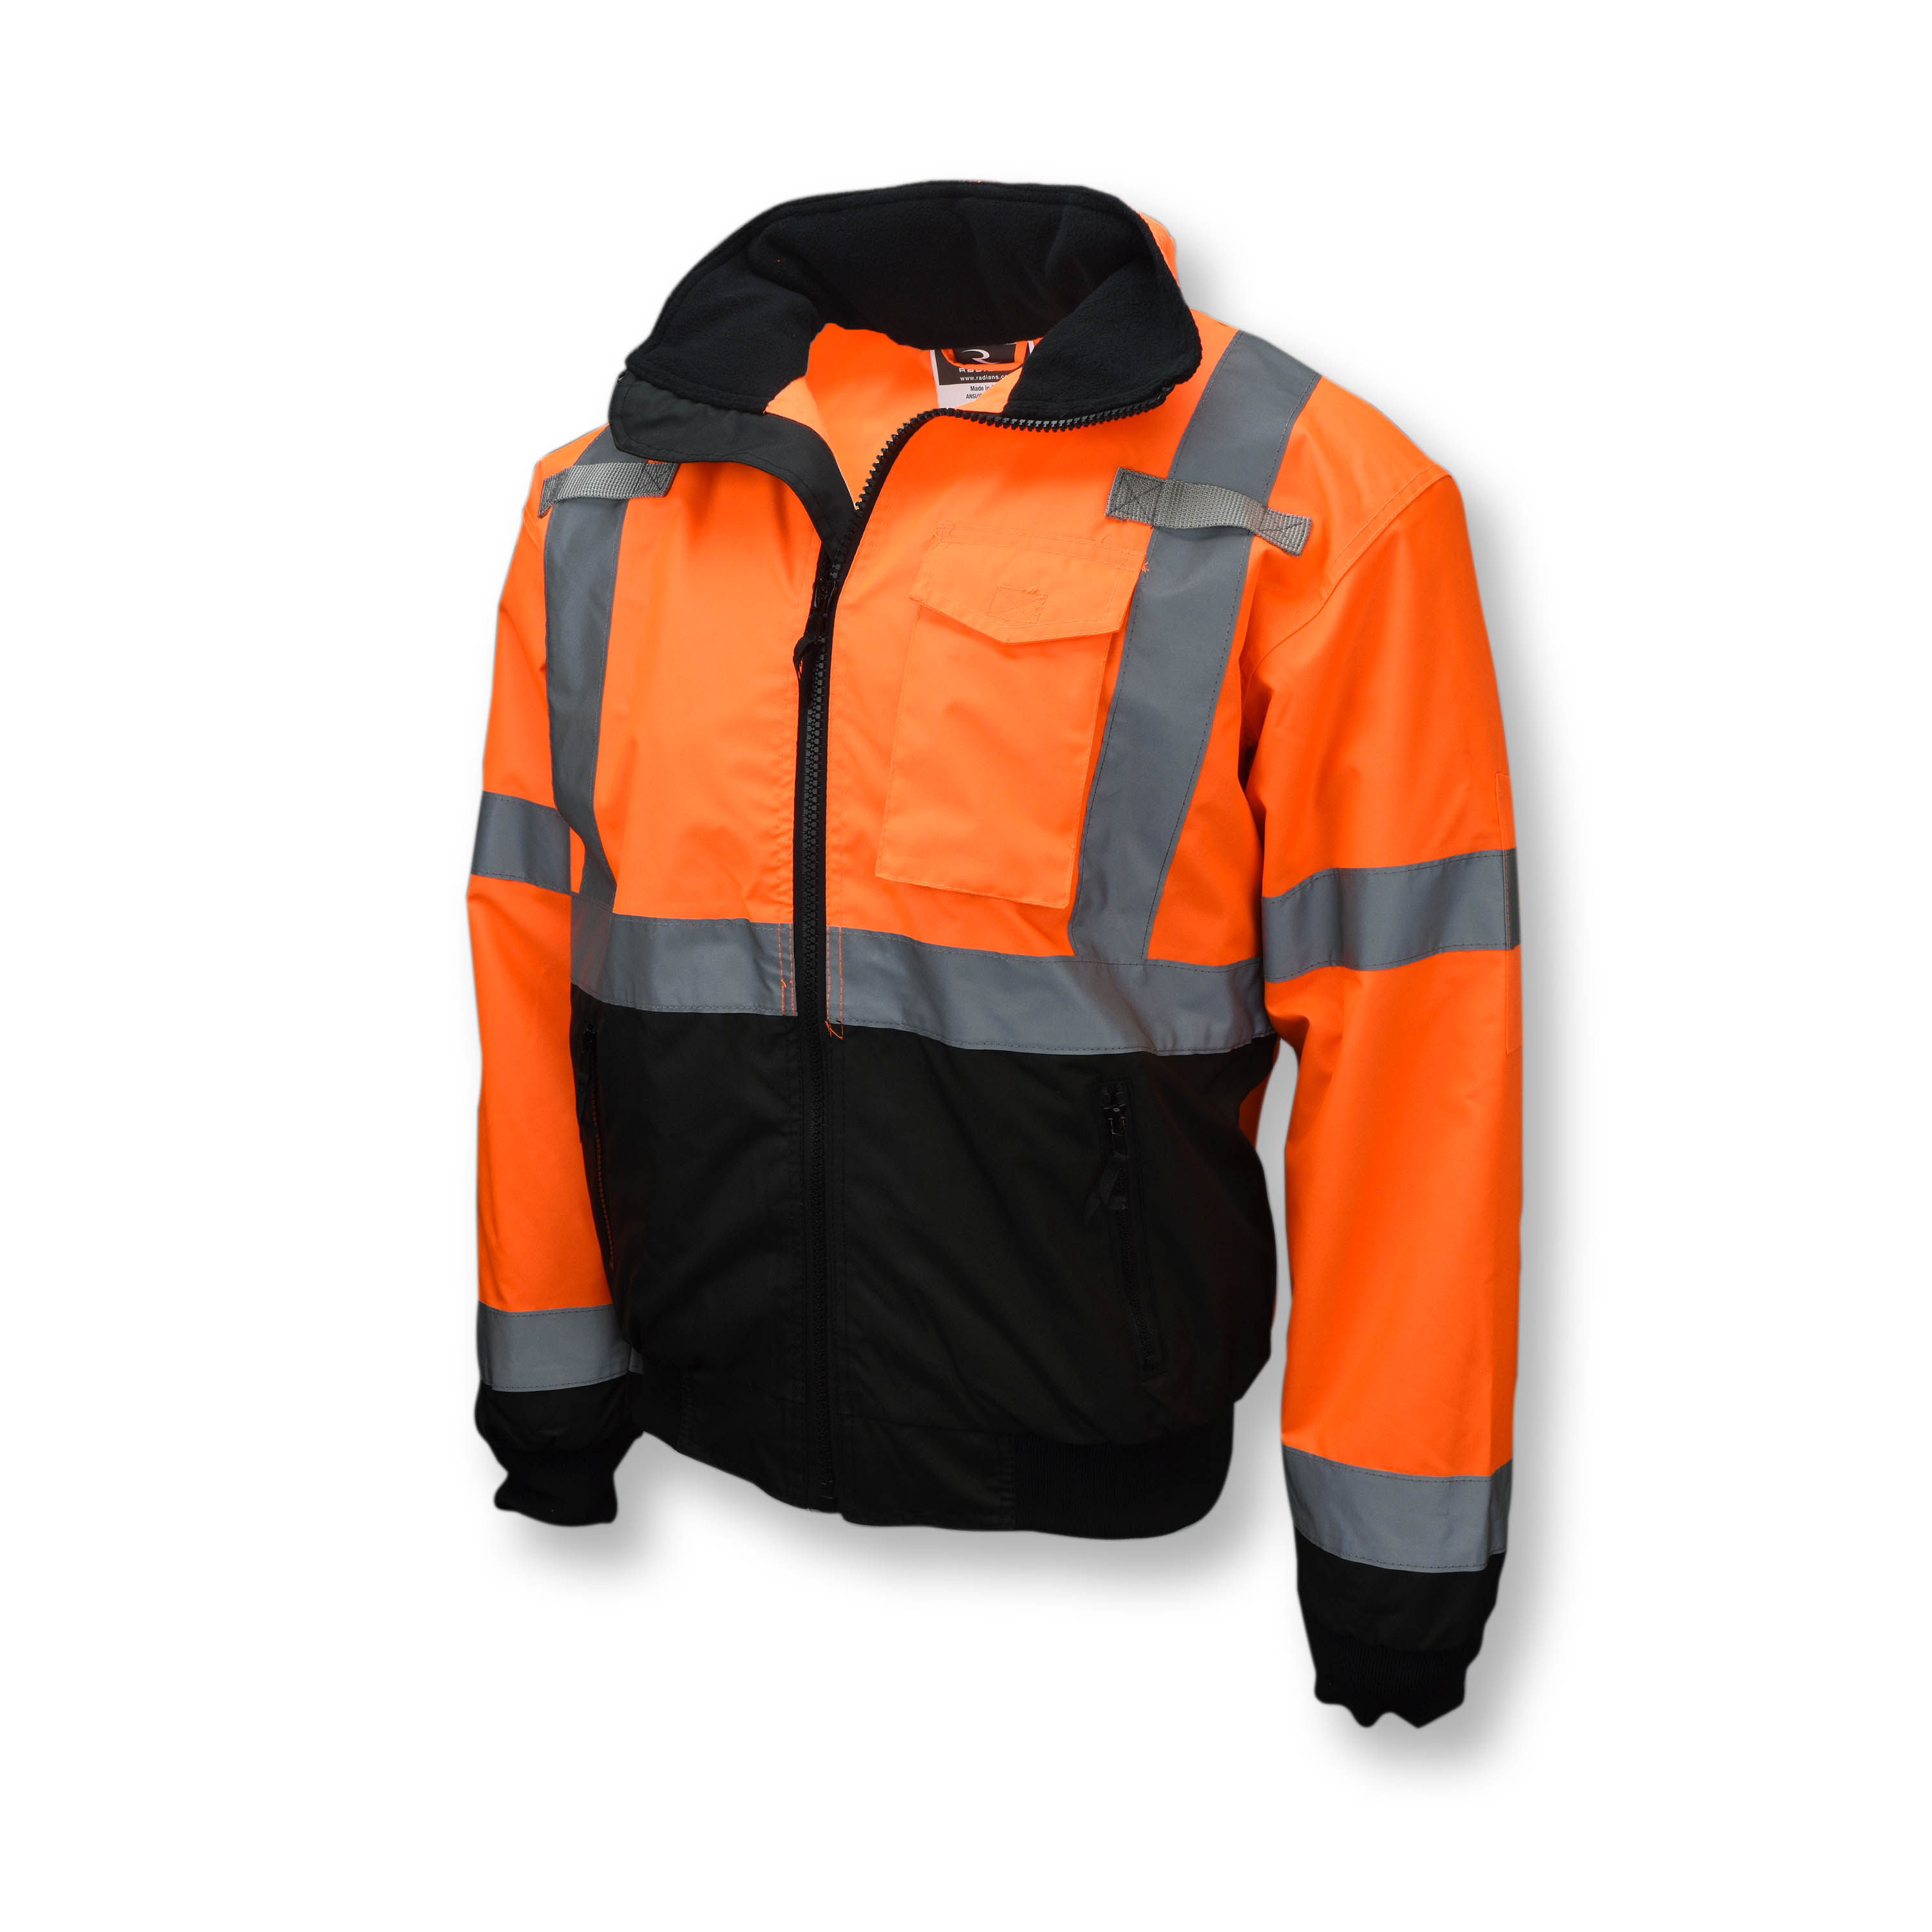 SJ110B Class 3 Two-in-One High Visibility Bomber Safety Jacket - Orange/Black Bottom - Size 3X